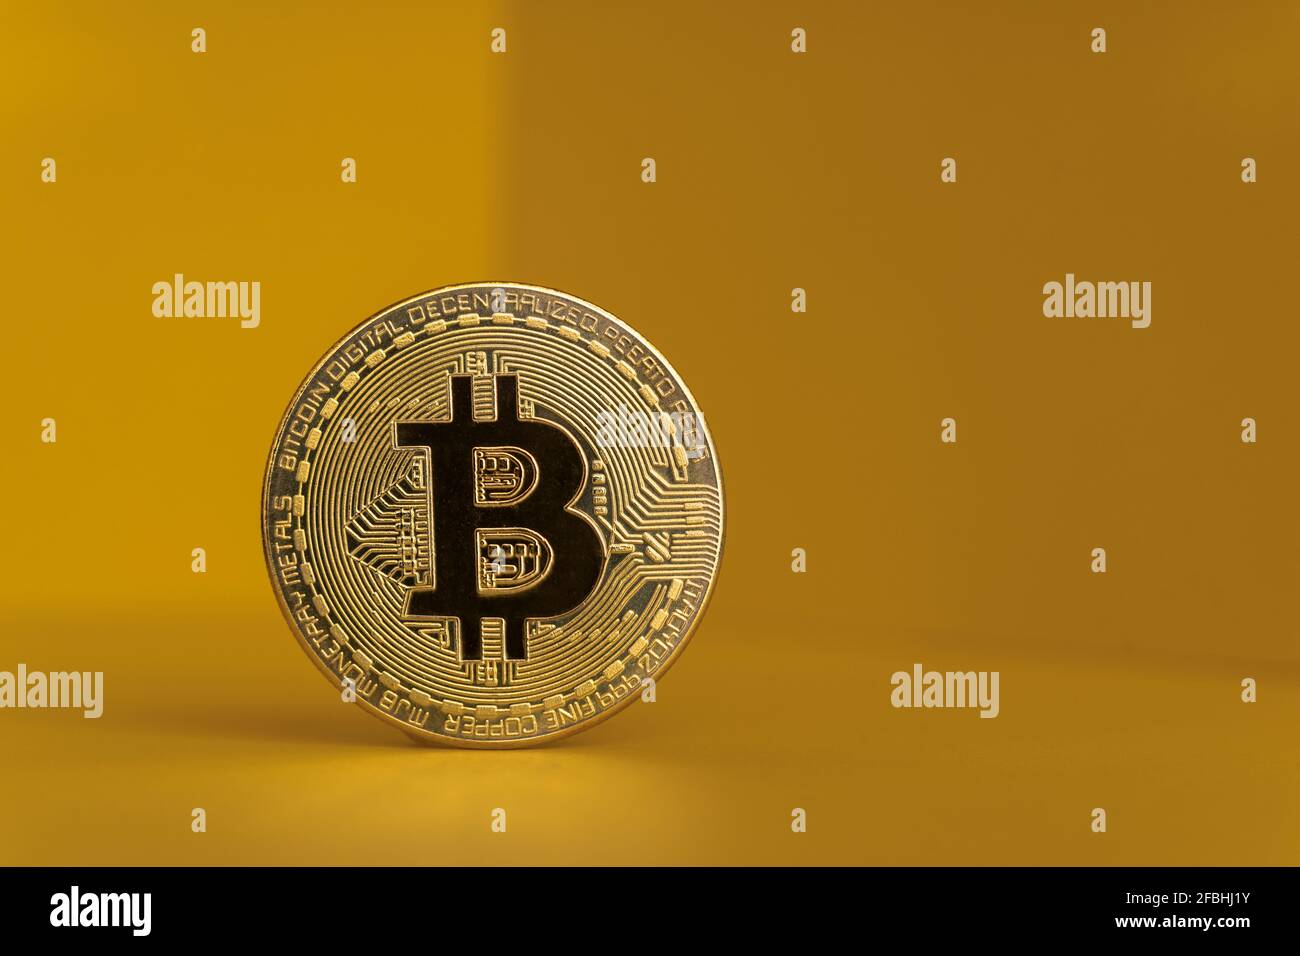 Gold colored bitcoin against yellow background Stock Photo